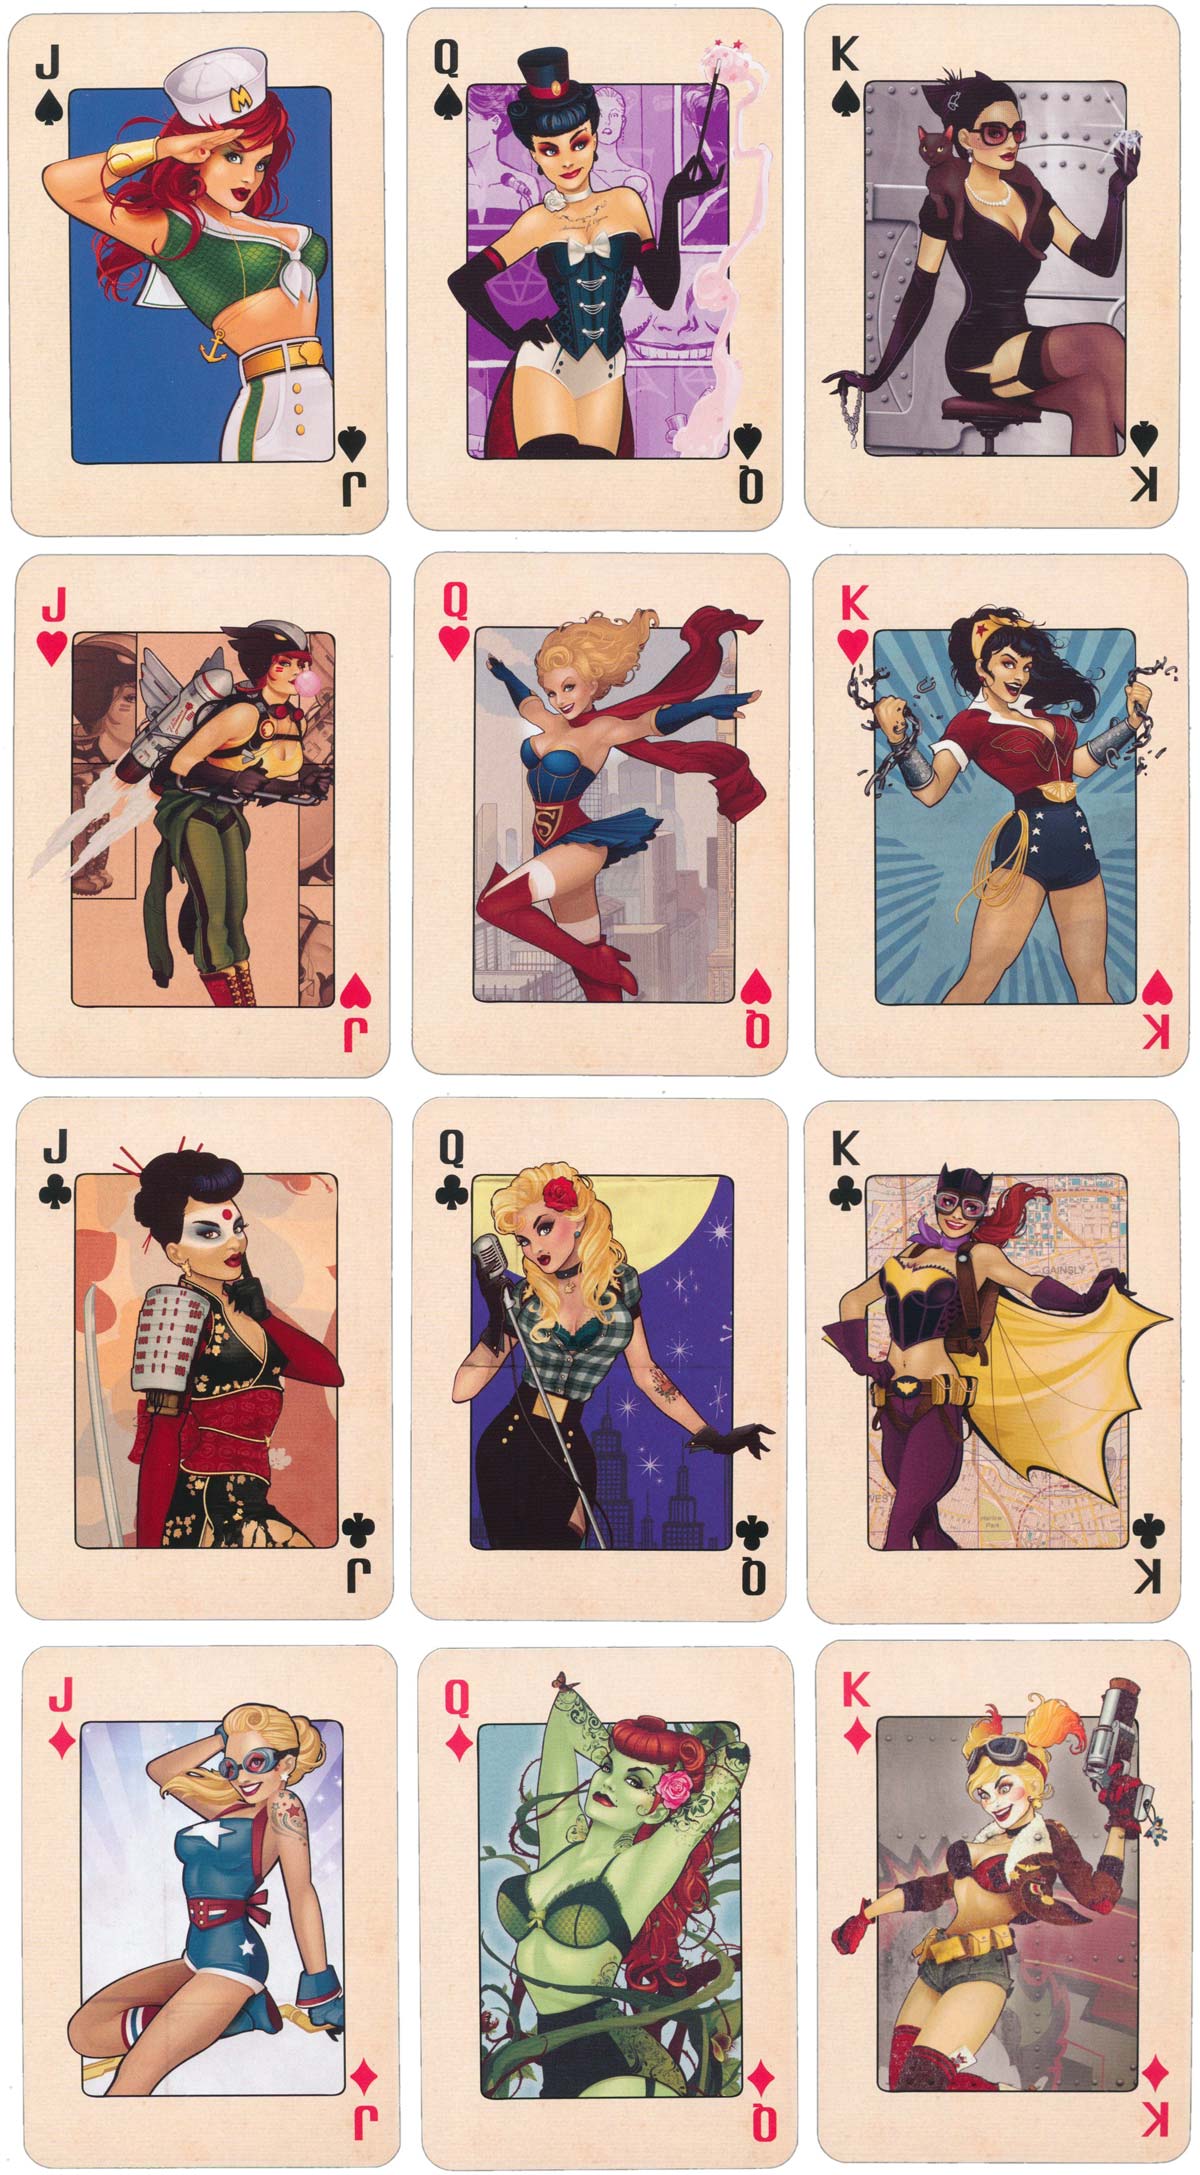 Glamorous female stars of DC Comics published by 'Forbidden Planet', 2015. ™ & © DC Comics